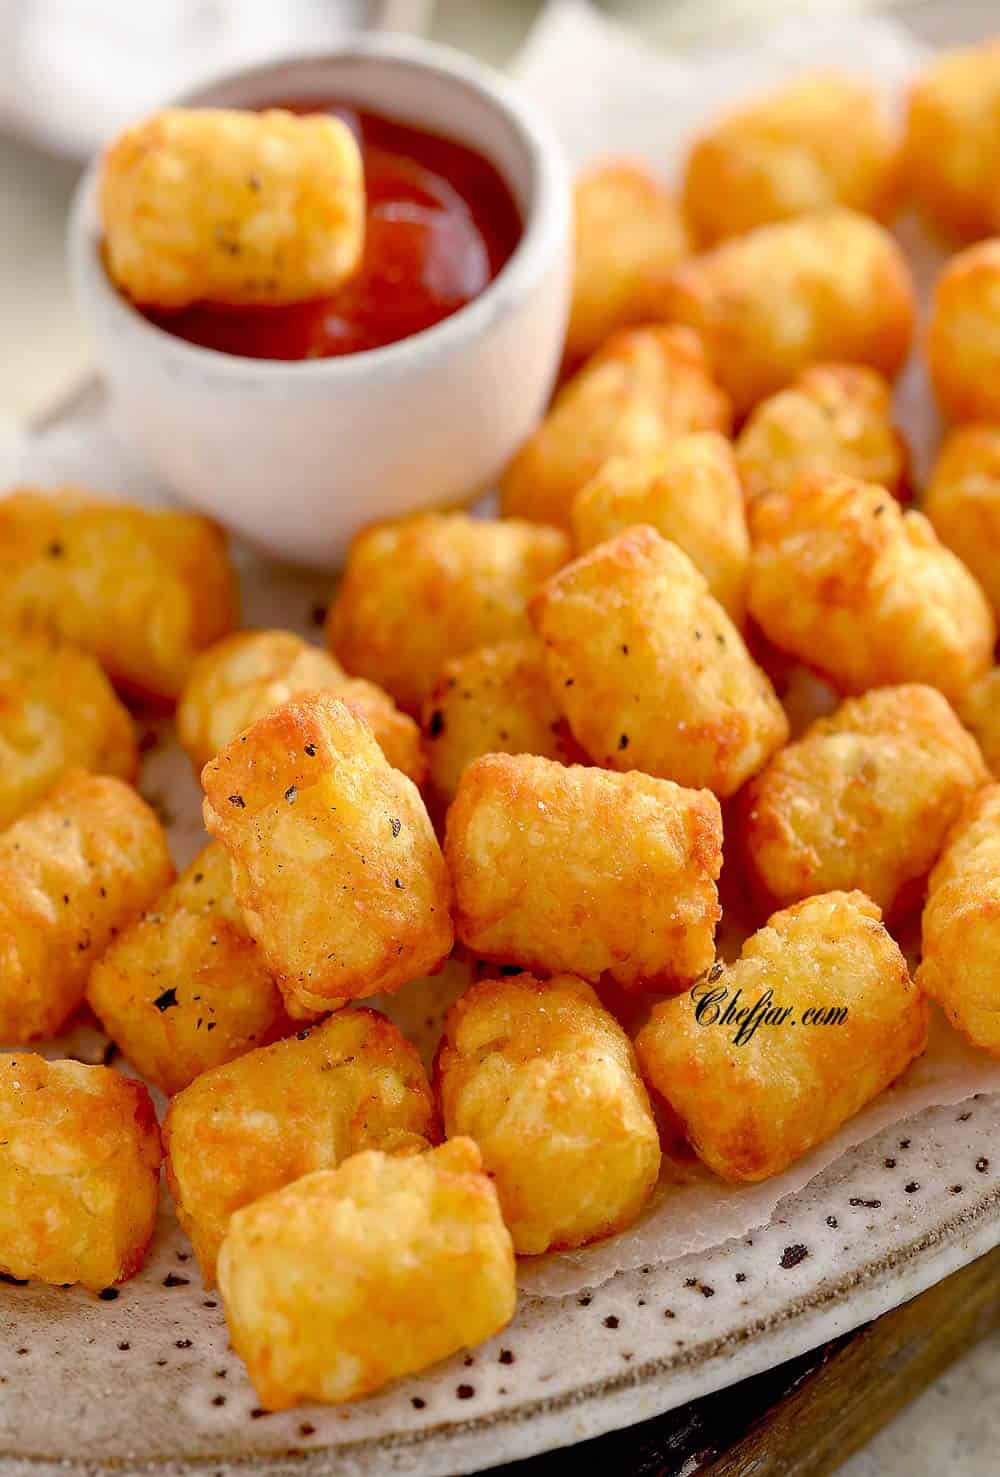 Frozen tator tots in air fryer basket (store bought frozen tater tots are air fried , often served as a side dish) with ketchup in it on the plate #airfryer #airfryerrecipes